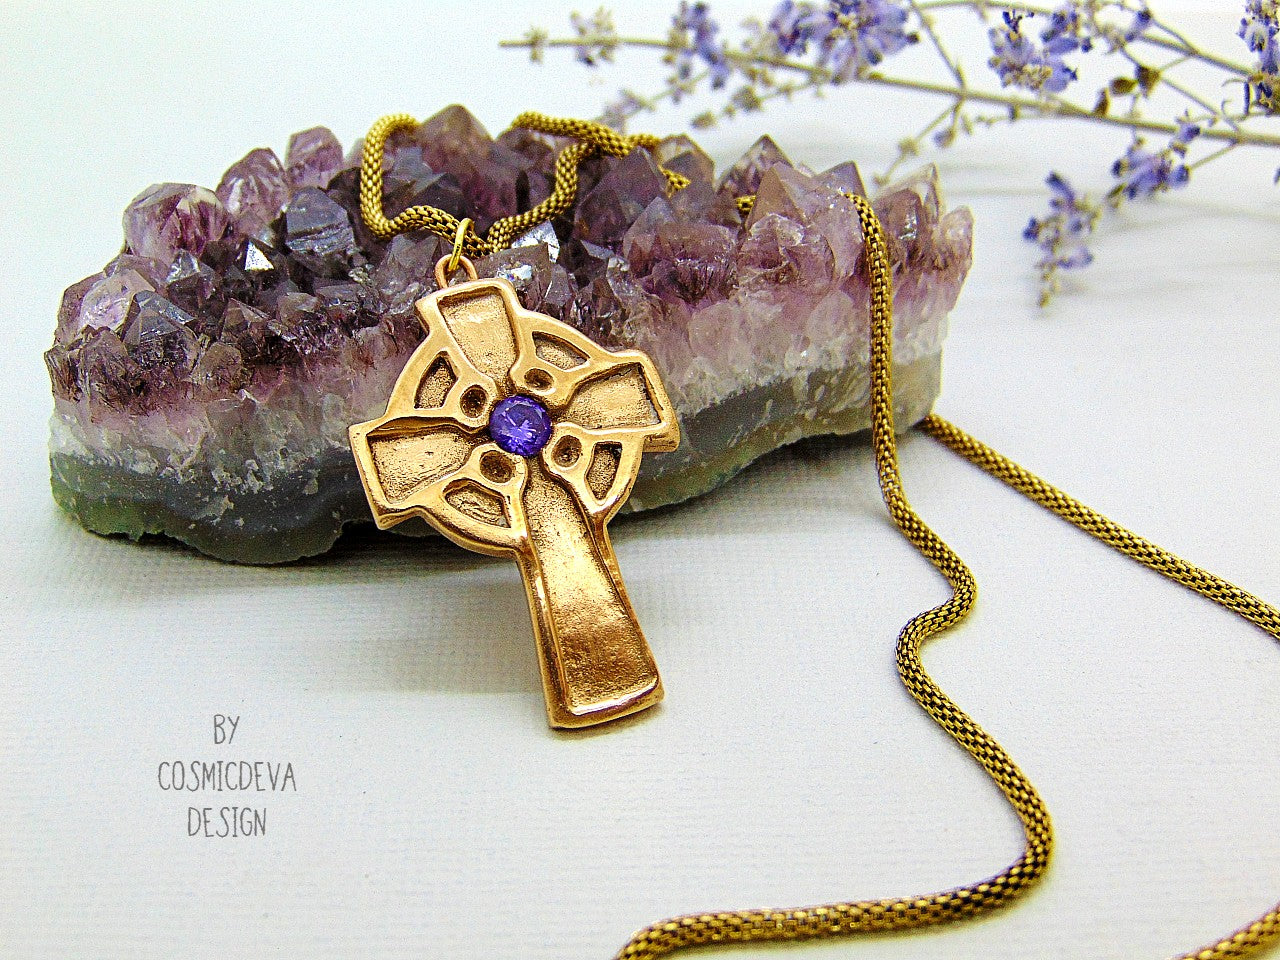 This handmade rustic Celtic Irish Cross pendant is made of solid gold bronze with a purple Amethyst in the center. The circle in the center represents the sun, an important item of worship in druid religion.